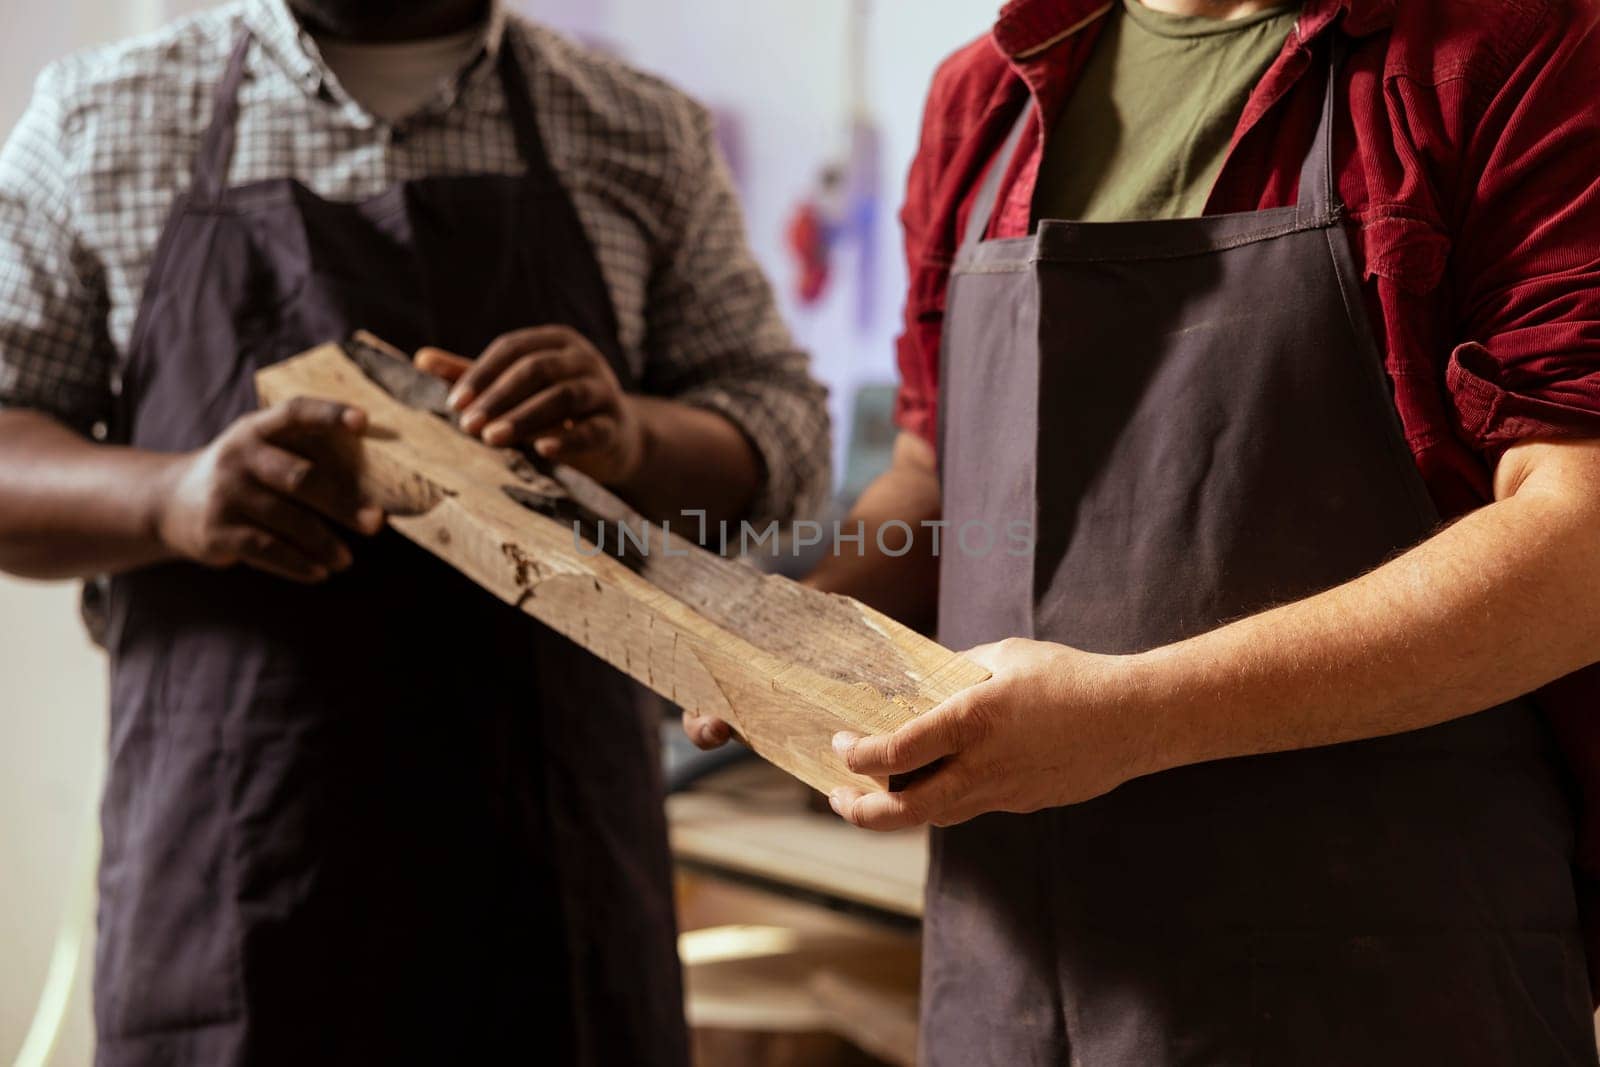 Manufacturer and apprentice selecting high quality wood materials, ensuring they align with project requirements. Cabinetmaker and colleague doing quality assurance on lumber piece, close up shot